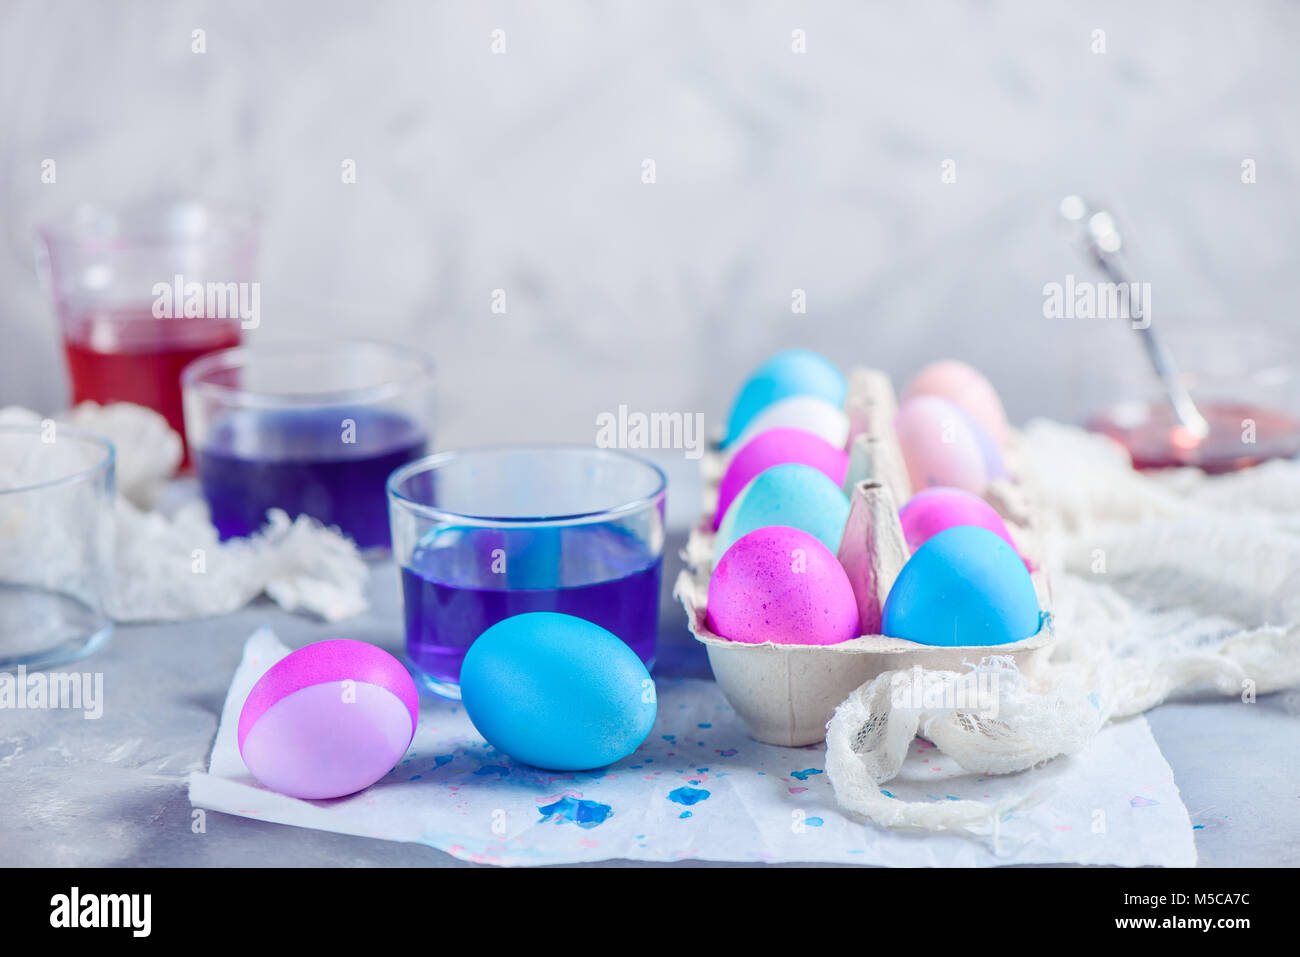 Happy Easter background with copy space. Easter eggs in a paper carton. Modern high key holiday scene with shades of blue and purple. Stock Photo